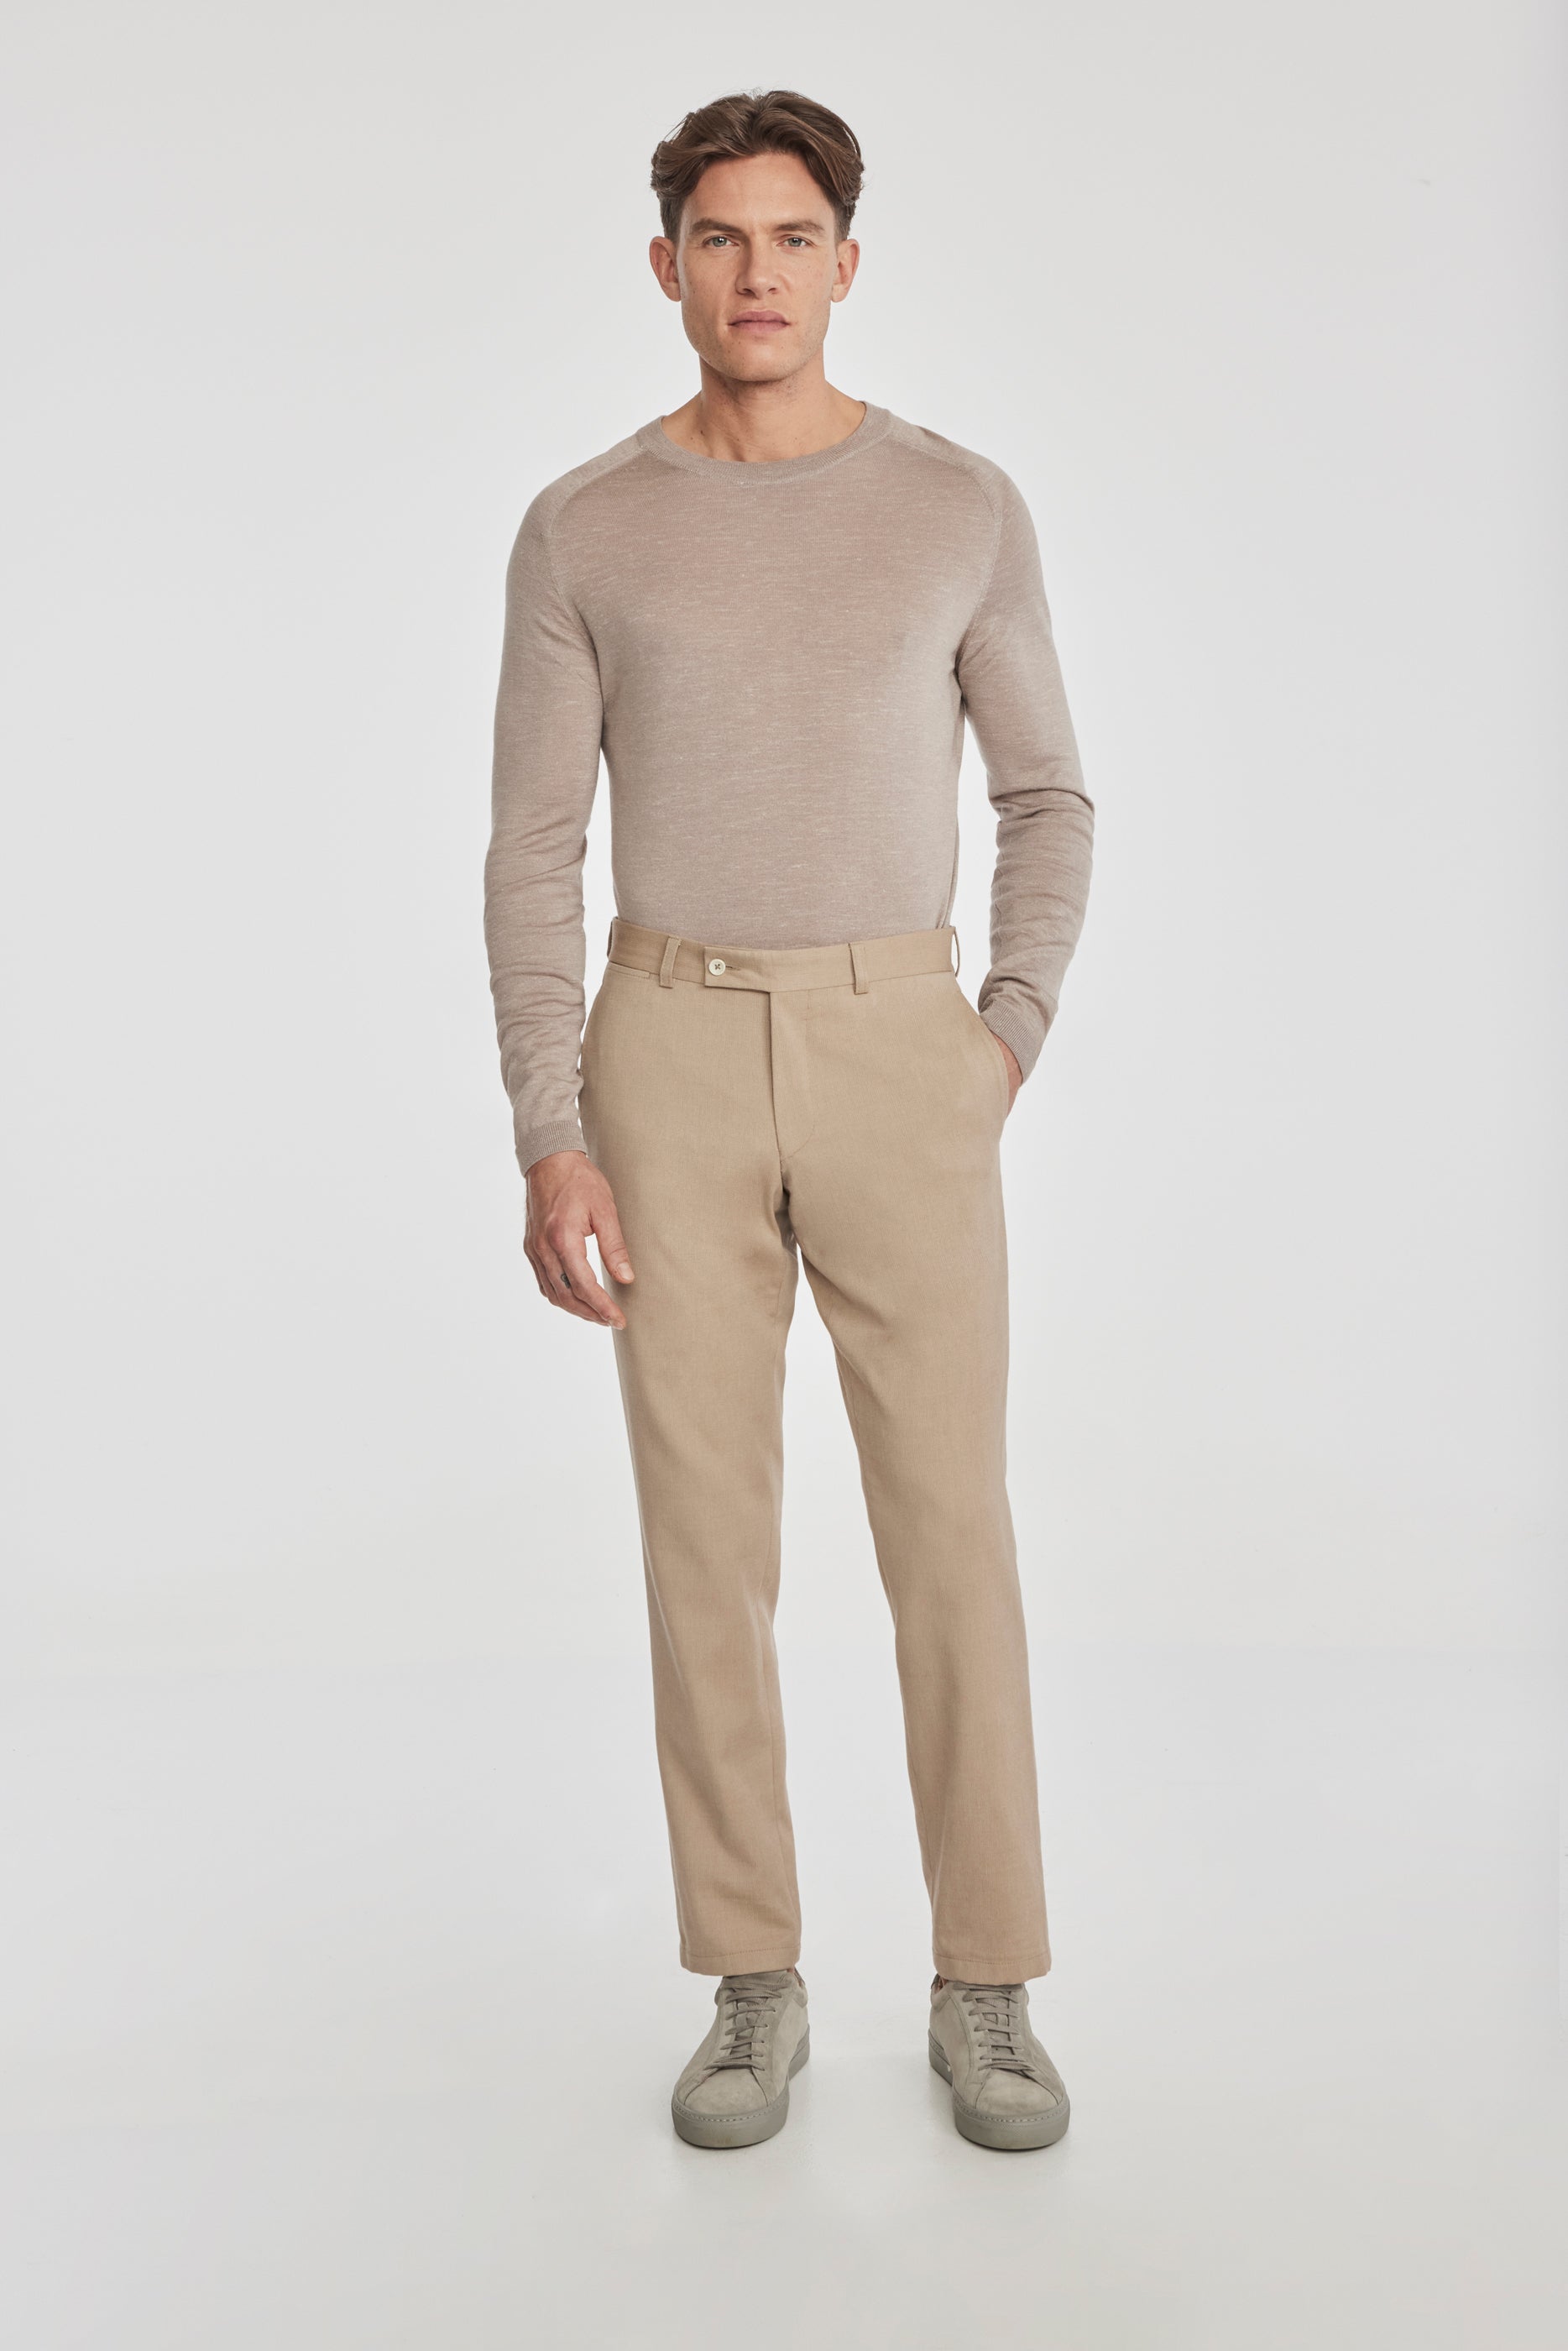 Jack Victor Men's Palmer Textured Cotton, Wool Stretch Trouser in Tan